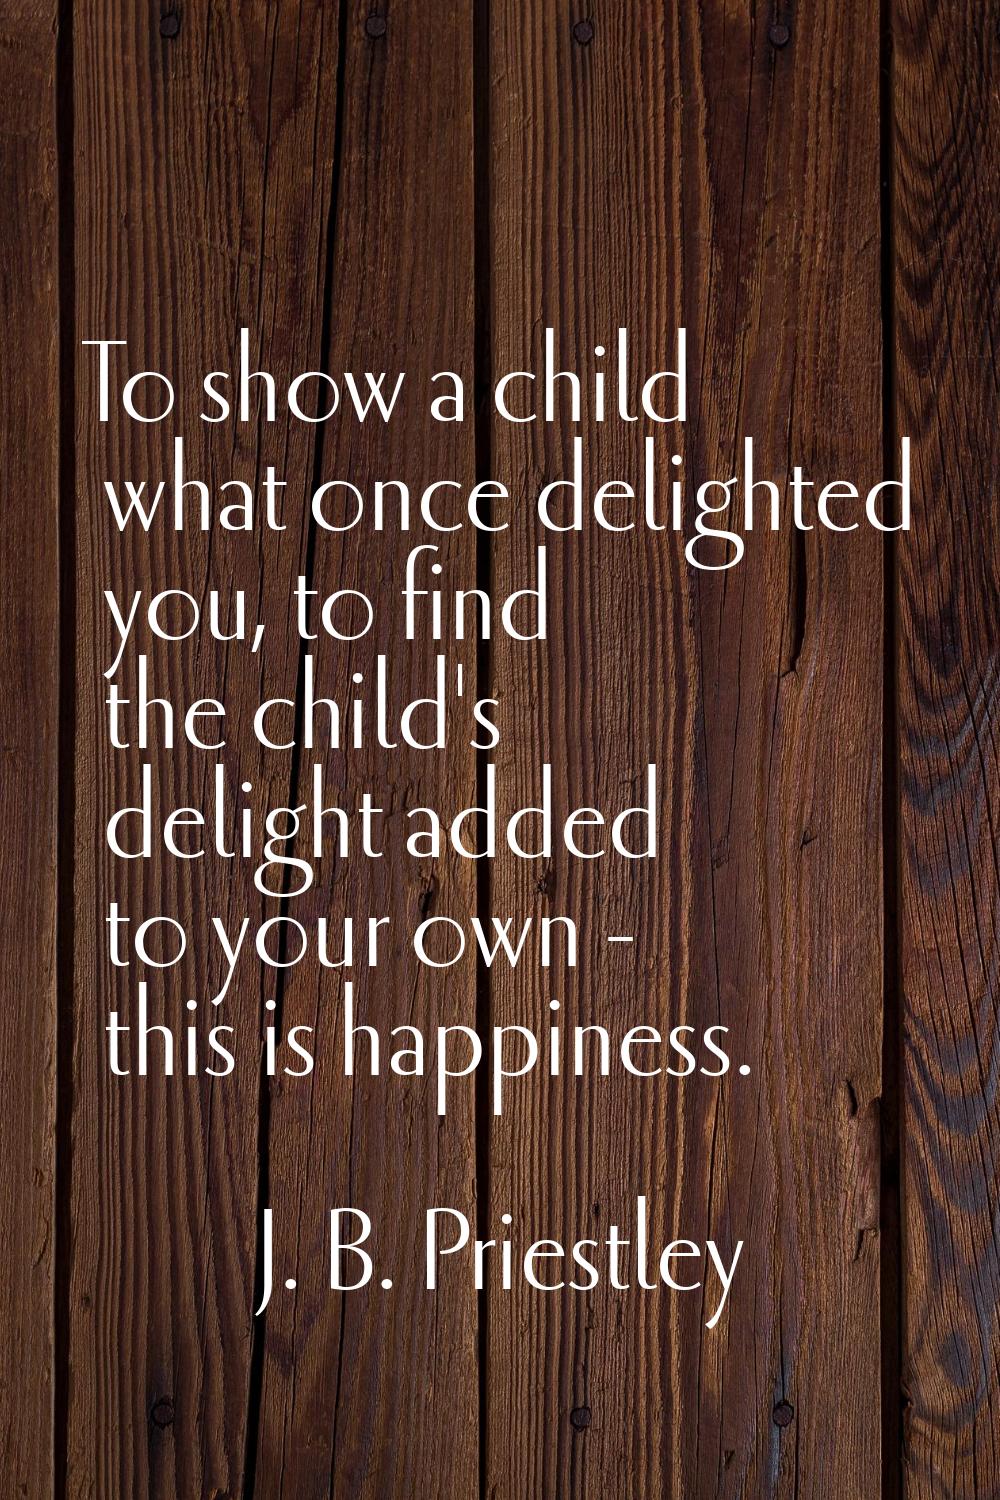 To show a child what once delighted you, to find the child's delight added to your own - this is ha